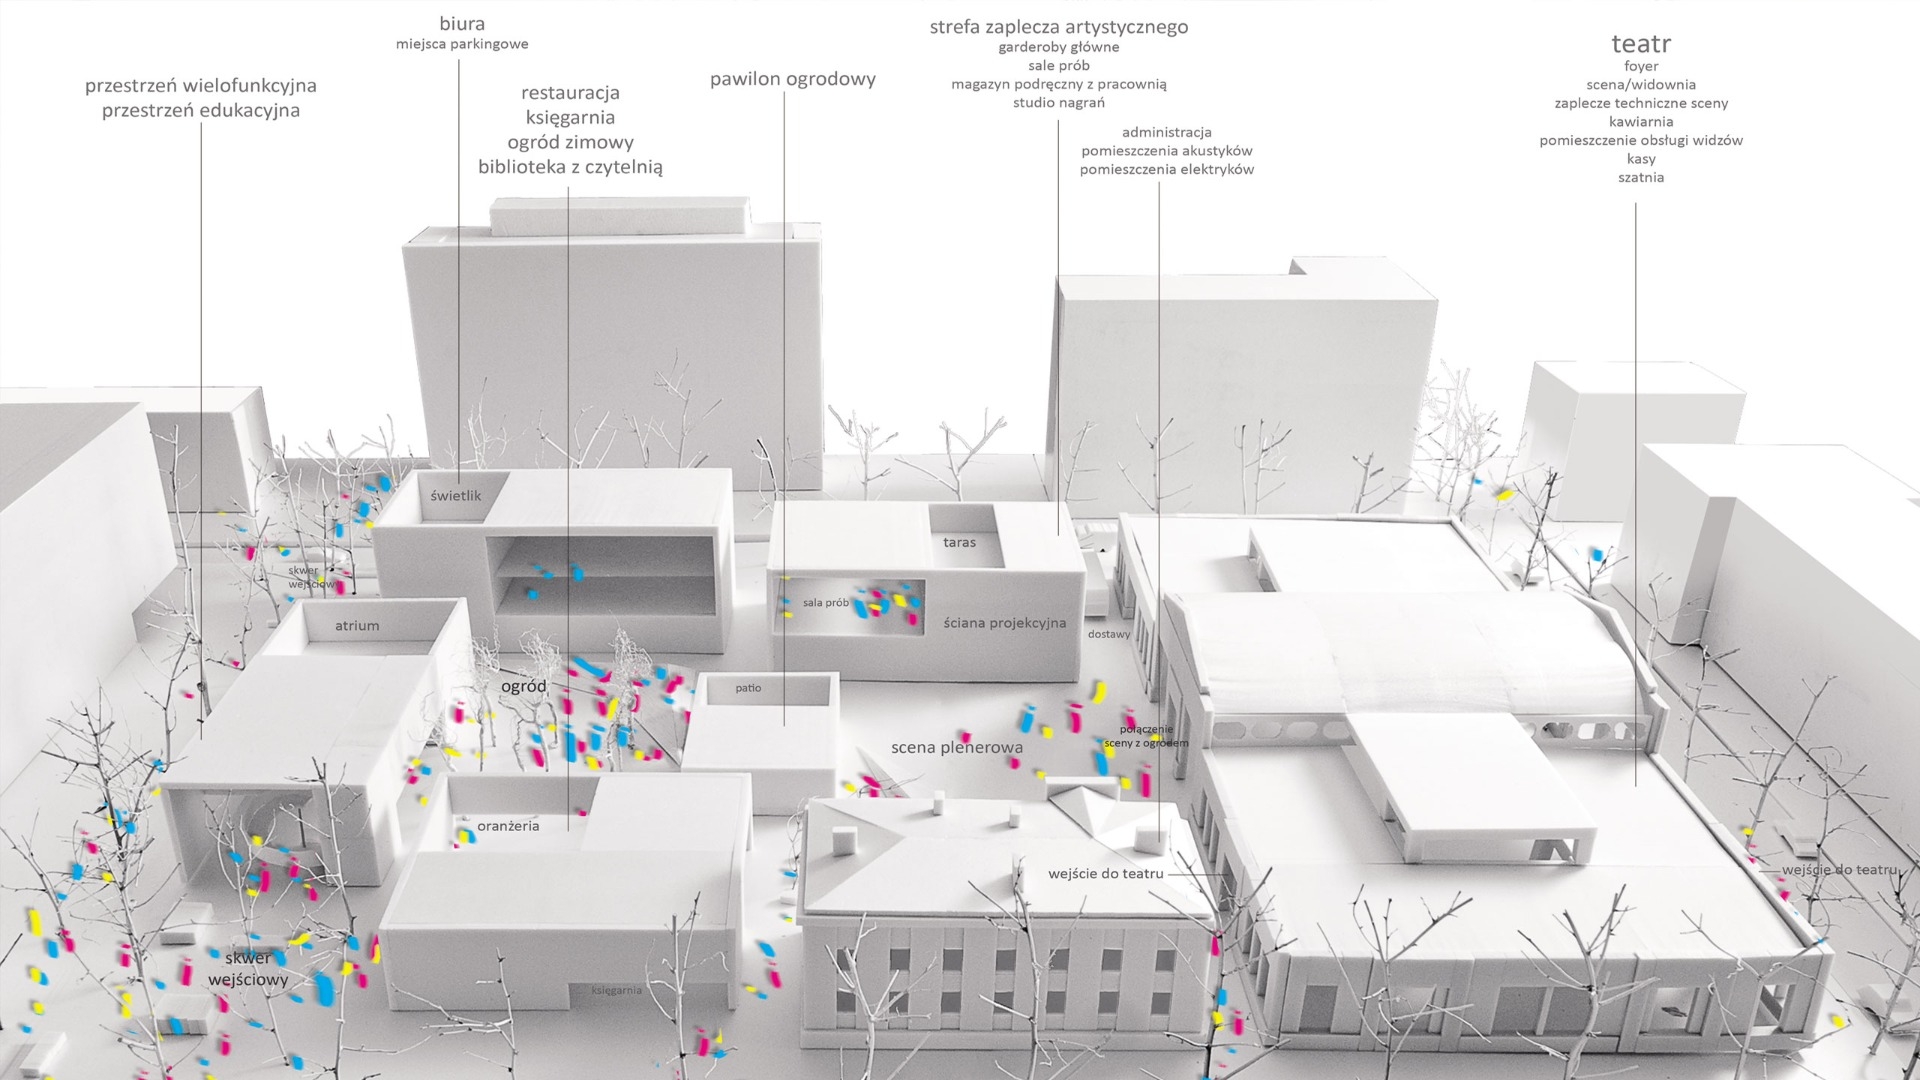 Competition for the building of Nowy Theatre